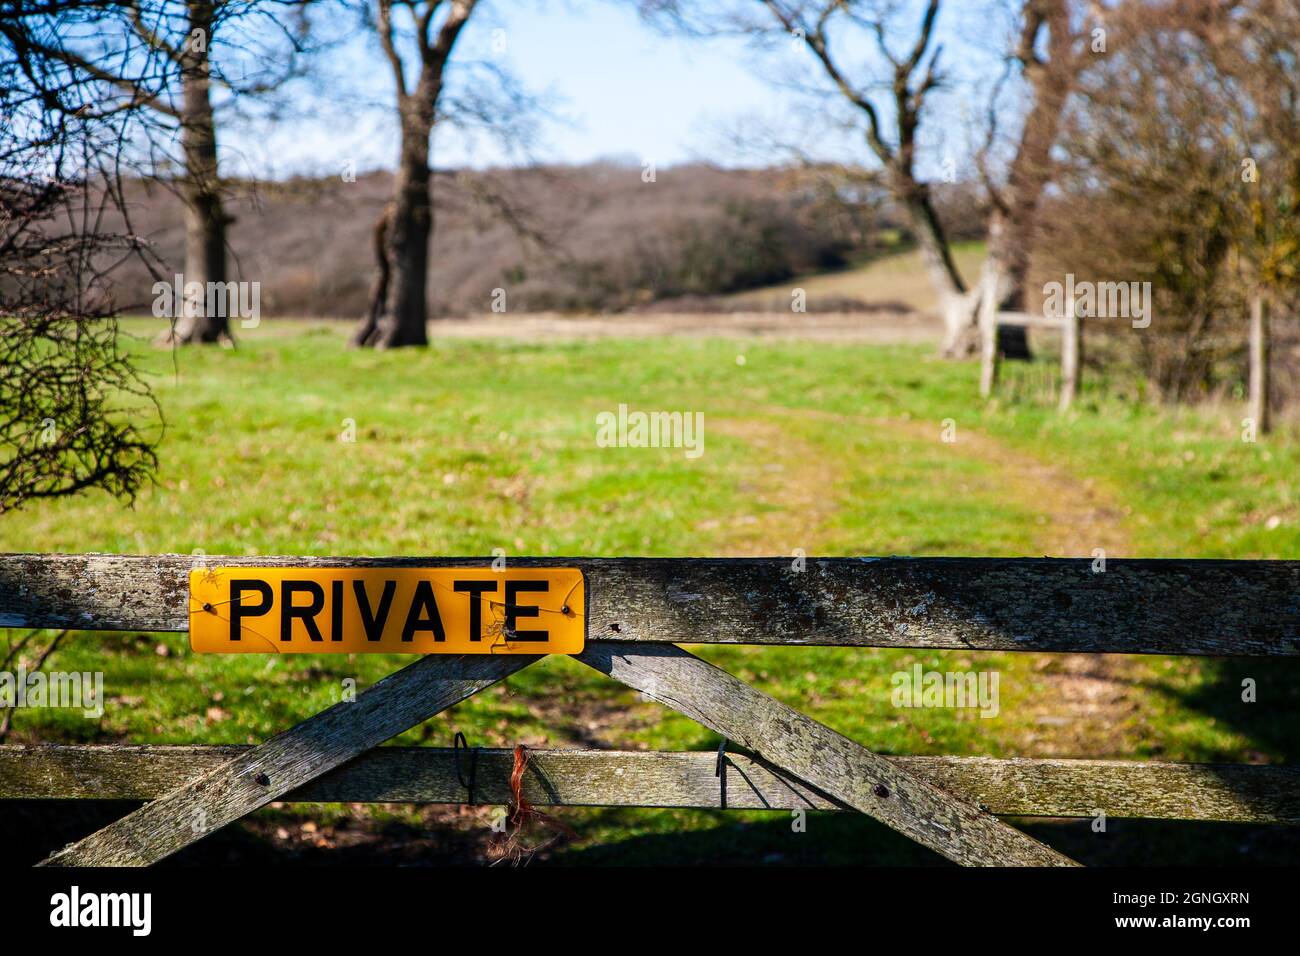 Car number plate PRIVATE sign on closed gate leading to open field and trees. England, UK Stock Photo